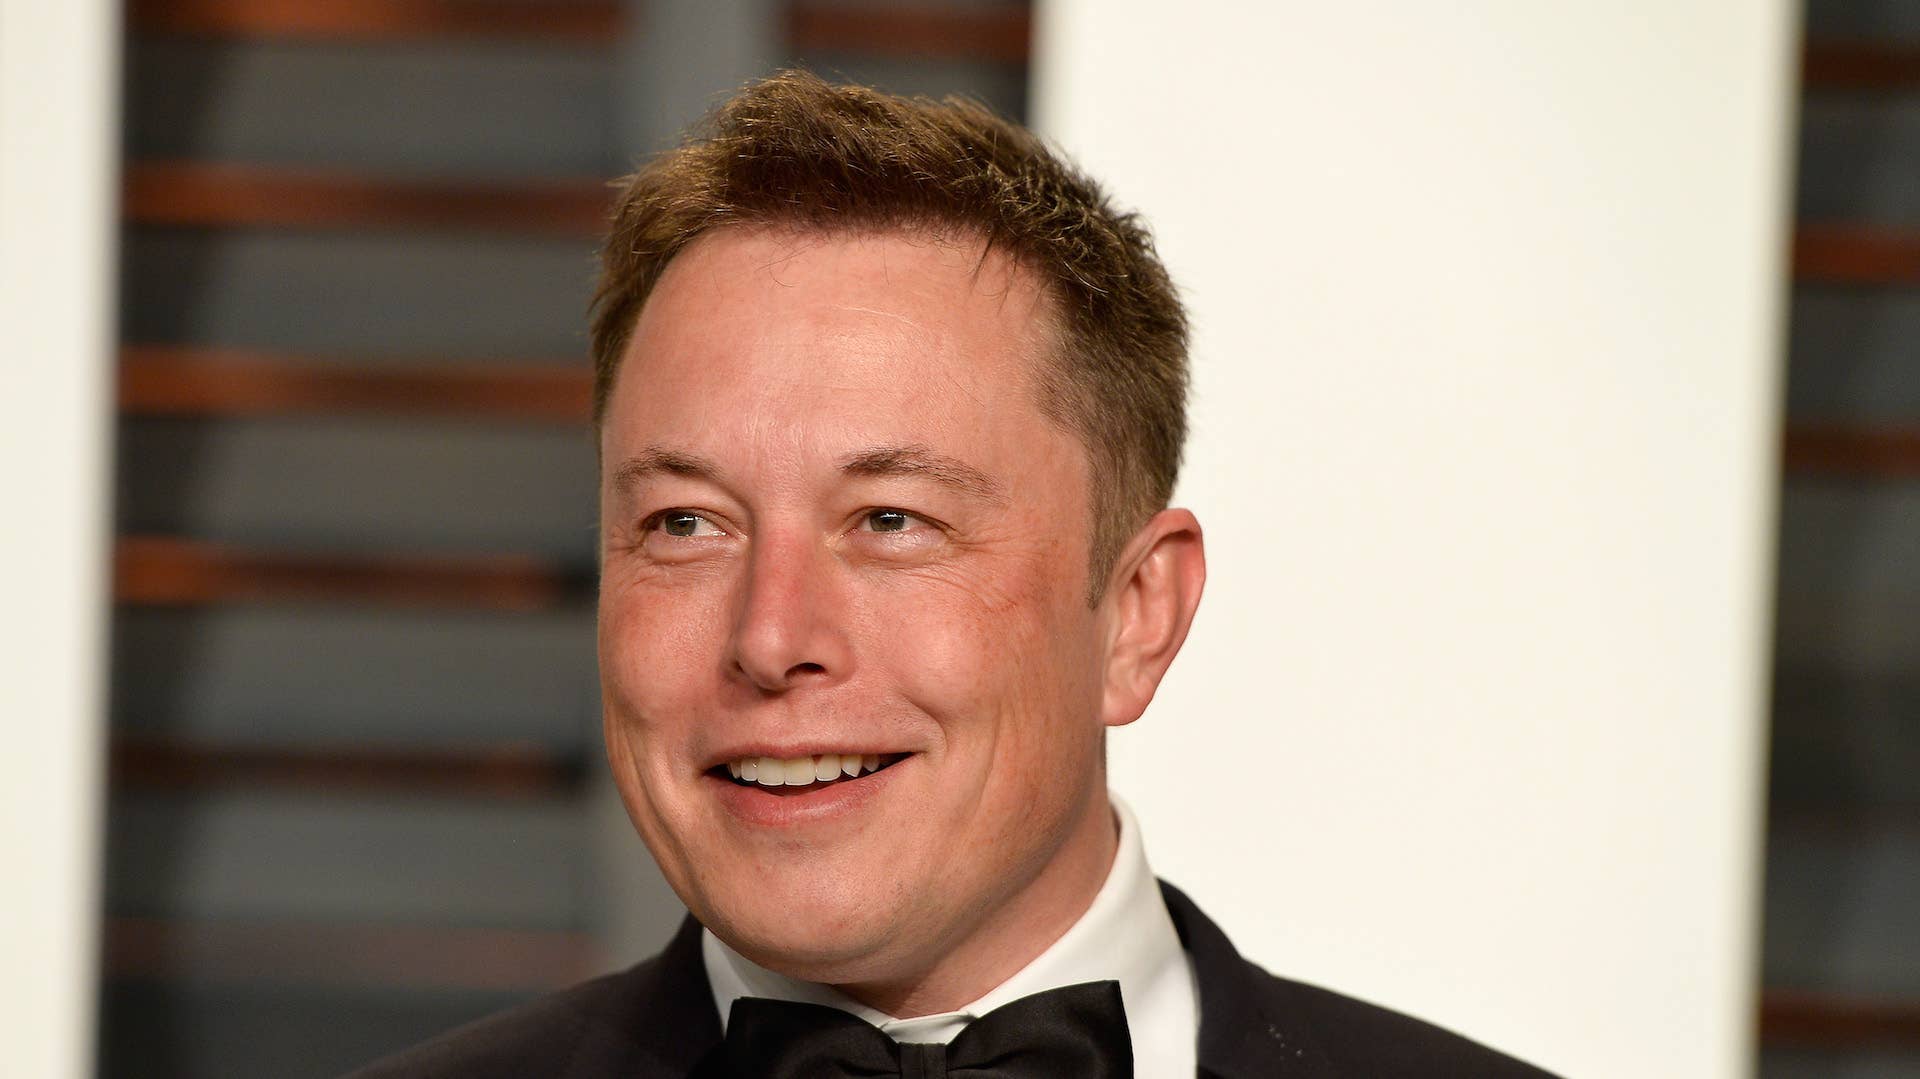 This is an image of Elon Musk